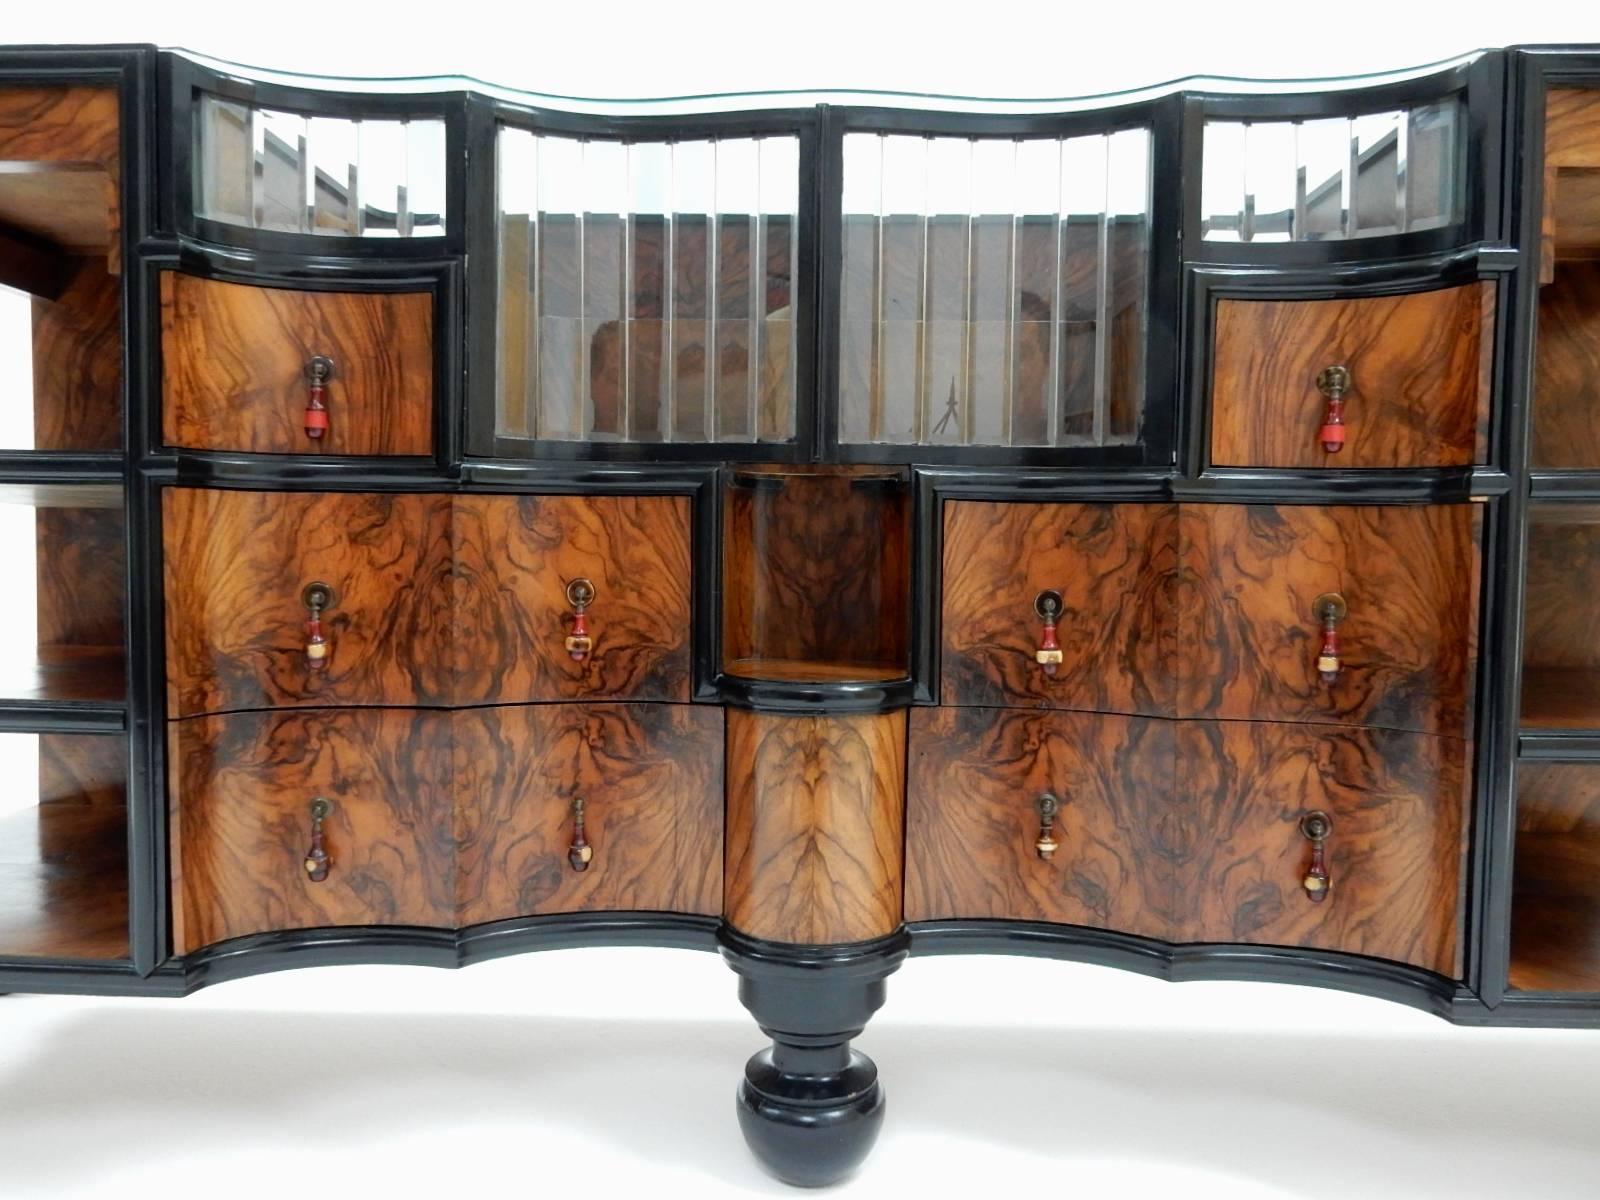 Exceptional dry bar sideboard cabinet, 1940's Italian.
A true work of art in every detail with all visual areas covered in gorgeous butterfly grain walnut veneer framed in ebonized molding.
Four sexy splayed legs with a huge center bun support leg